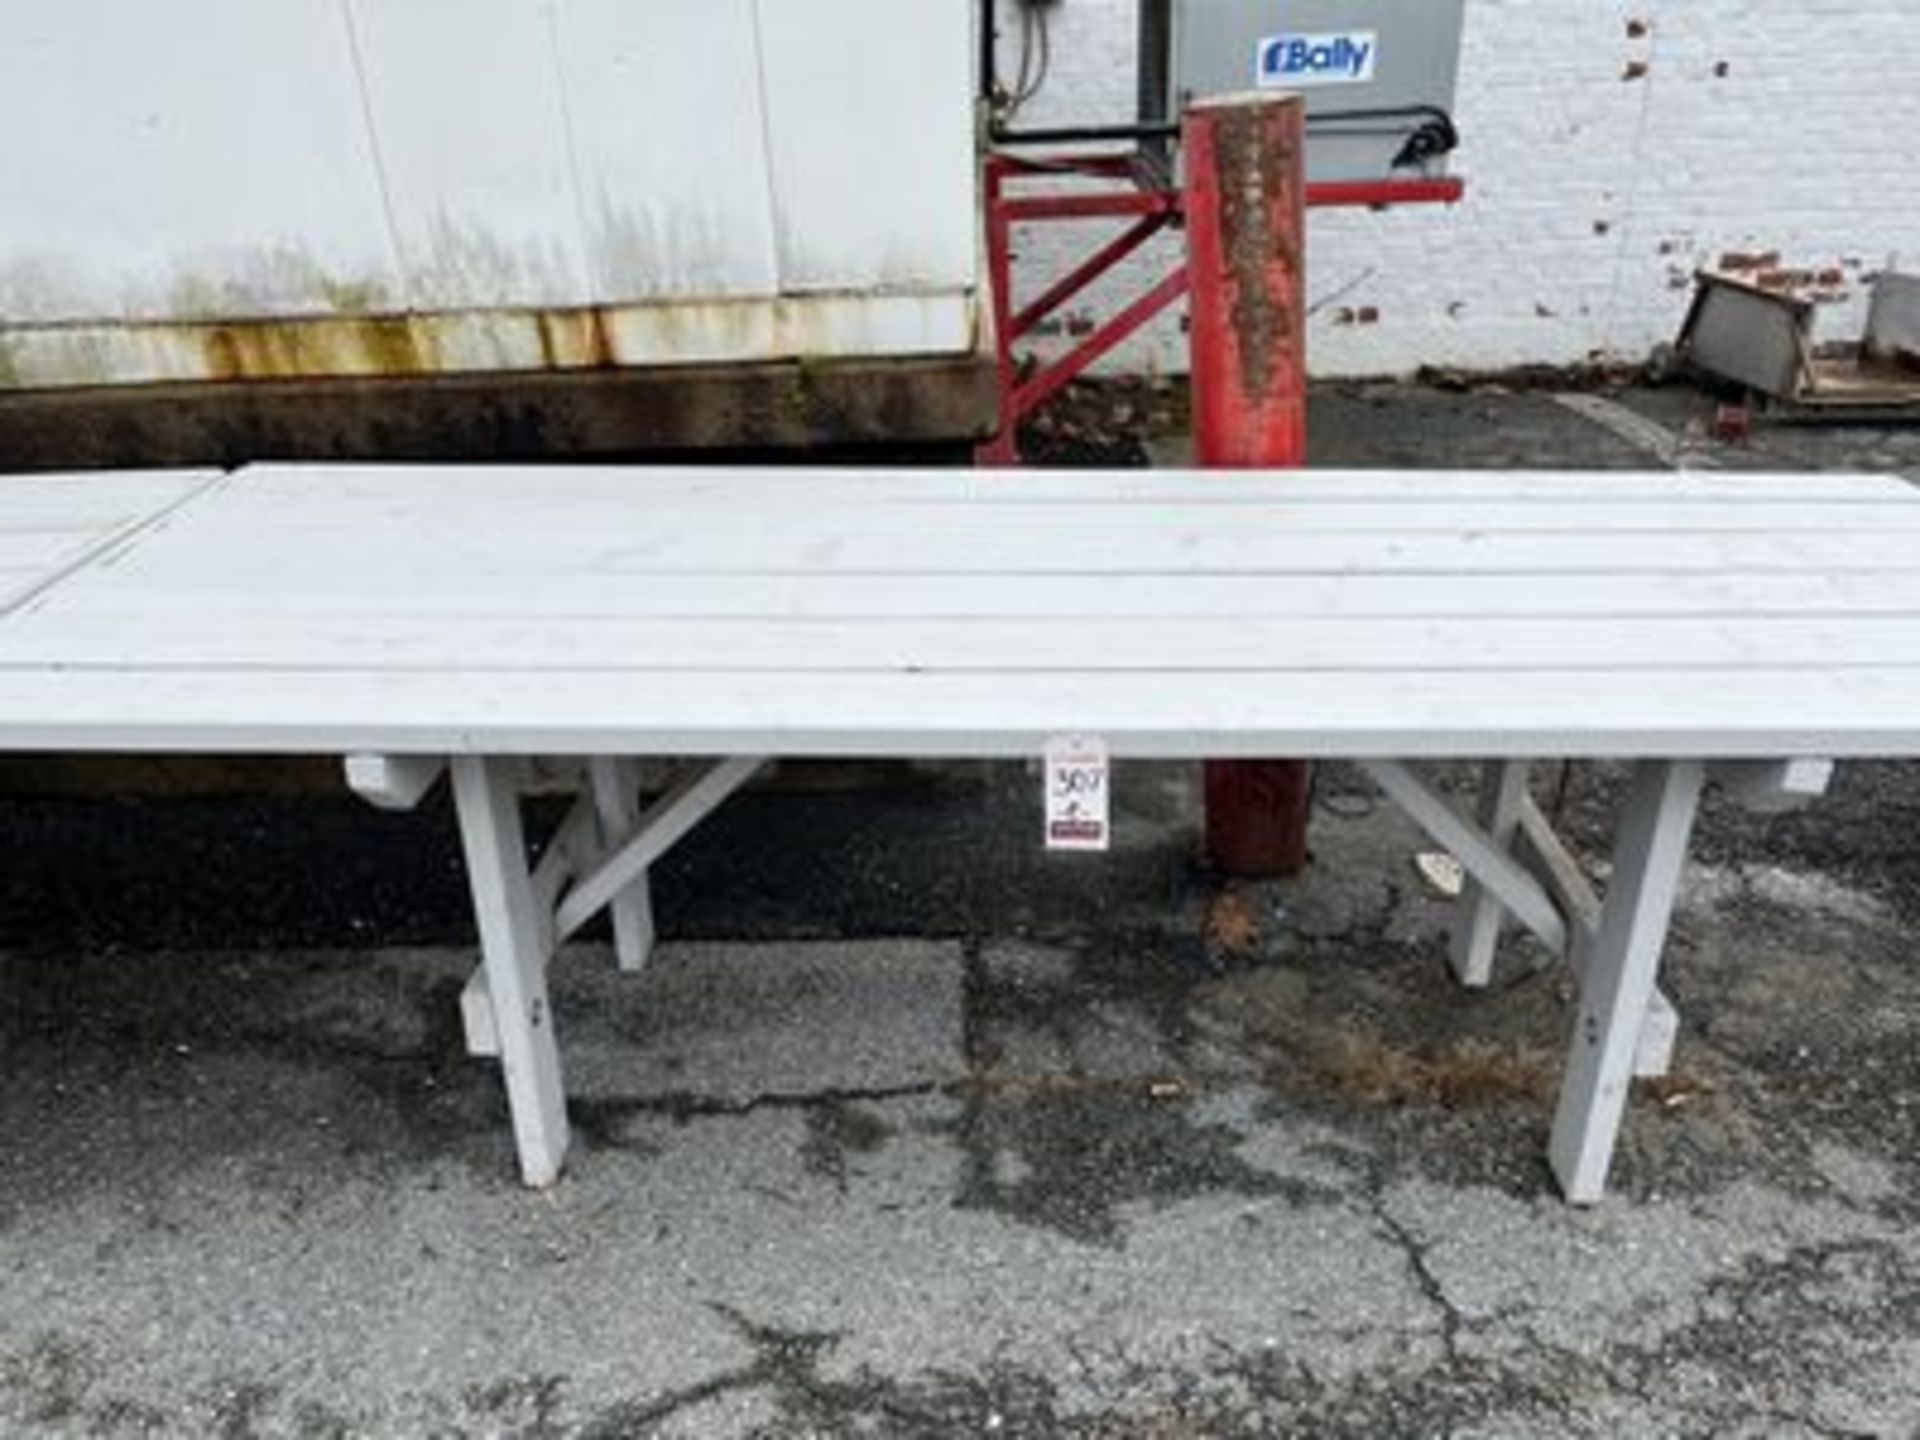 8'X34" GRAY WOODEN PICNIC TABLE